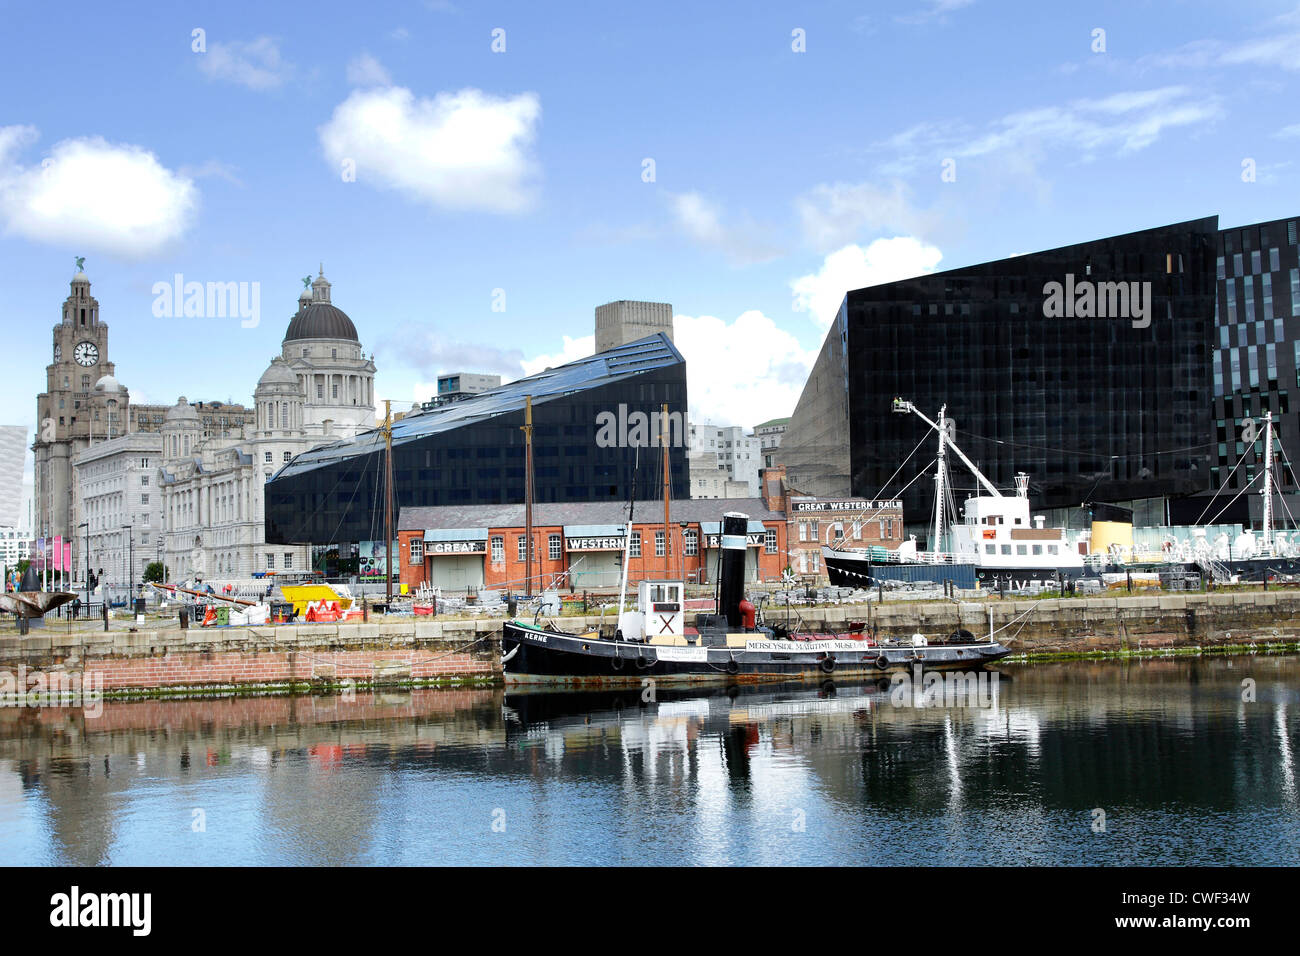 A view of the historic Liver Buildings in Liverpool, Merseyside, with modern office blocks in front. Stock Photo